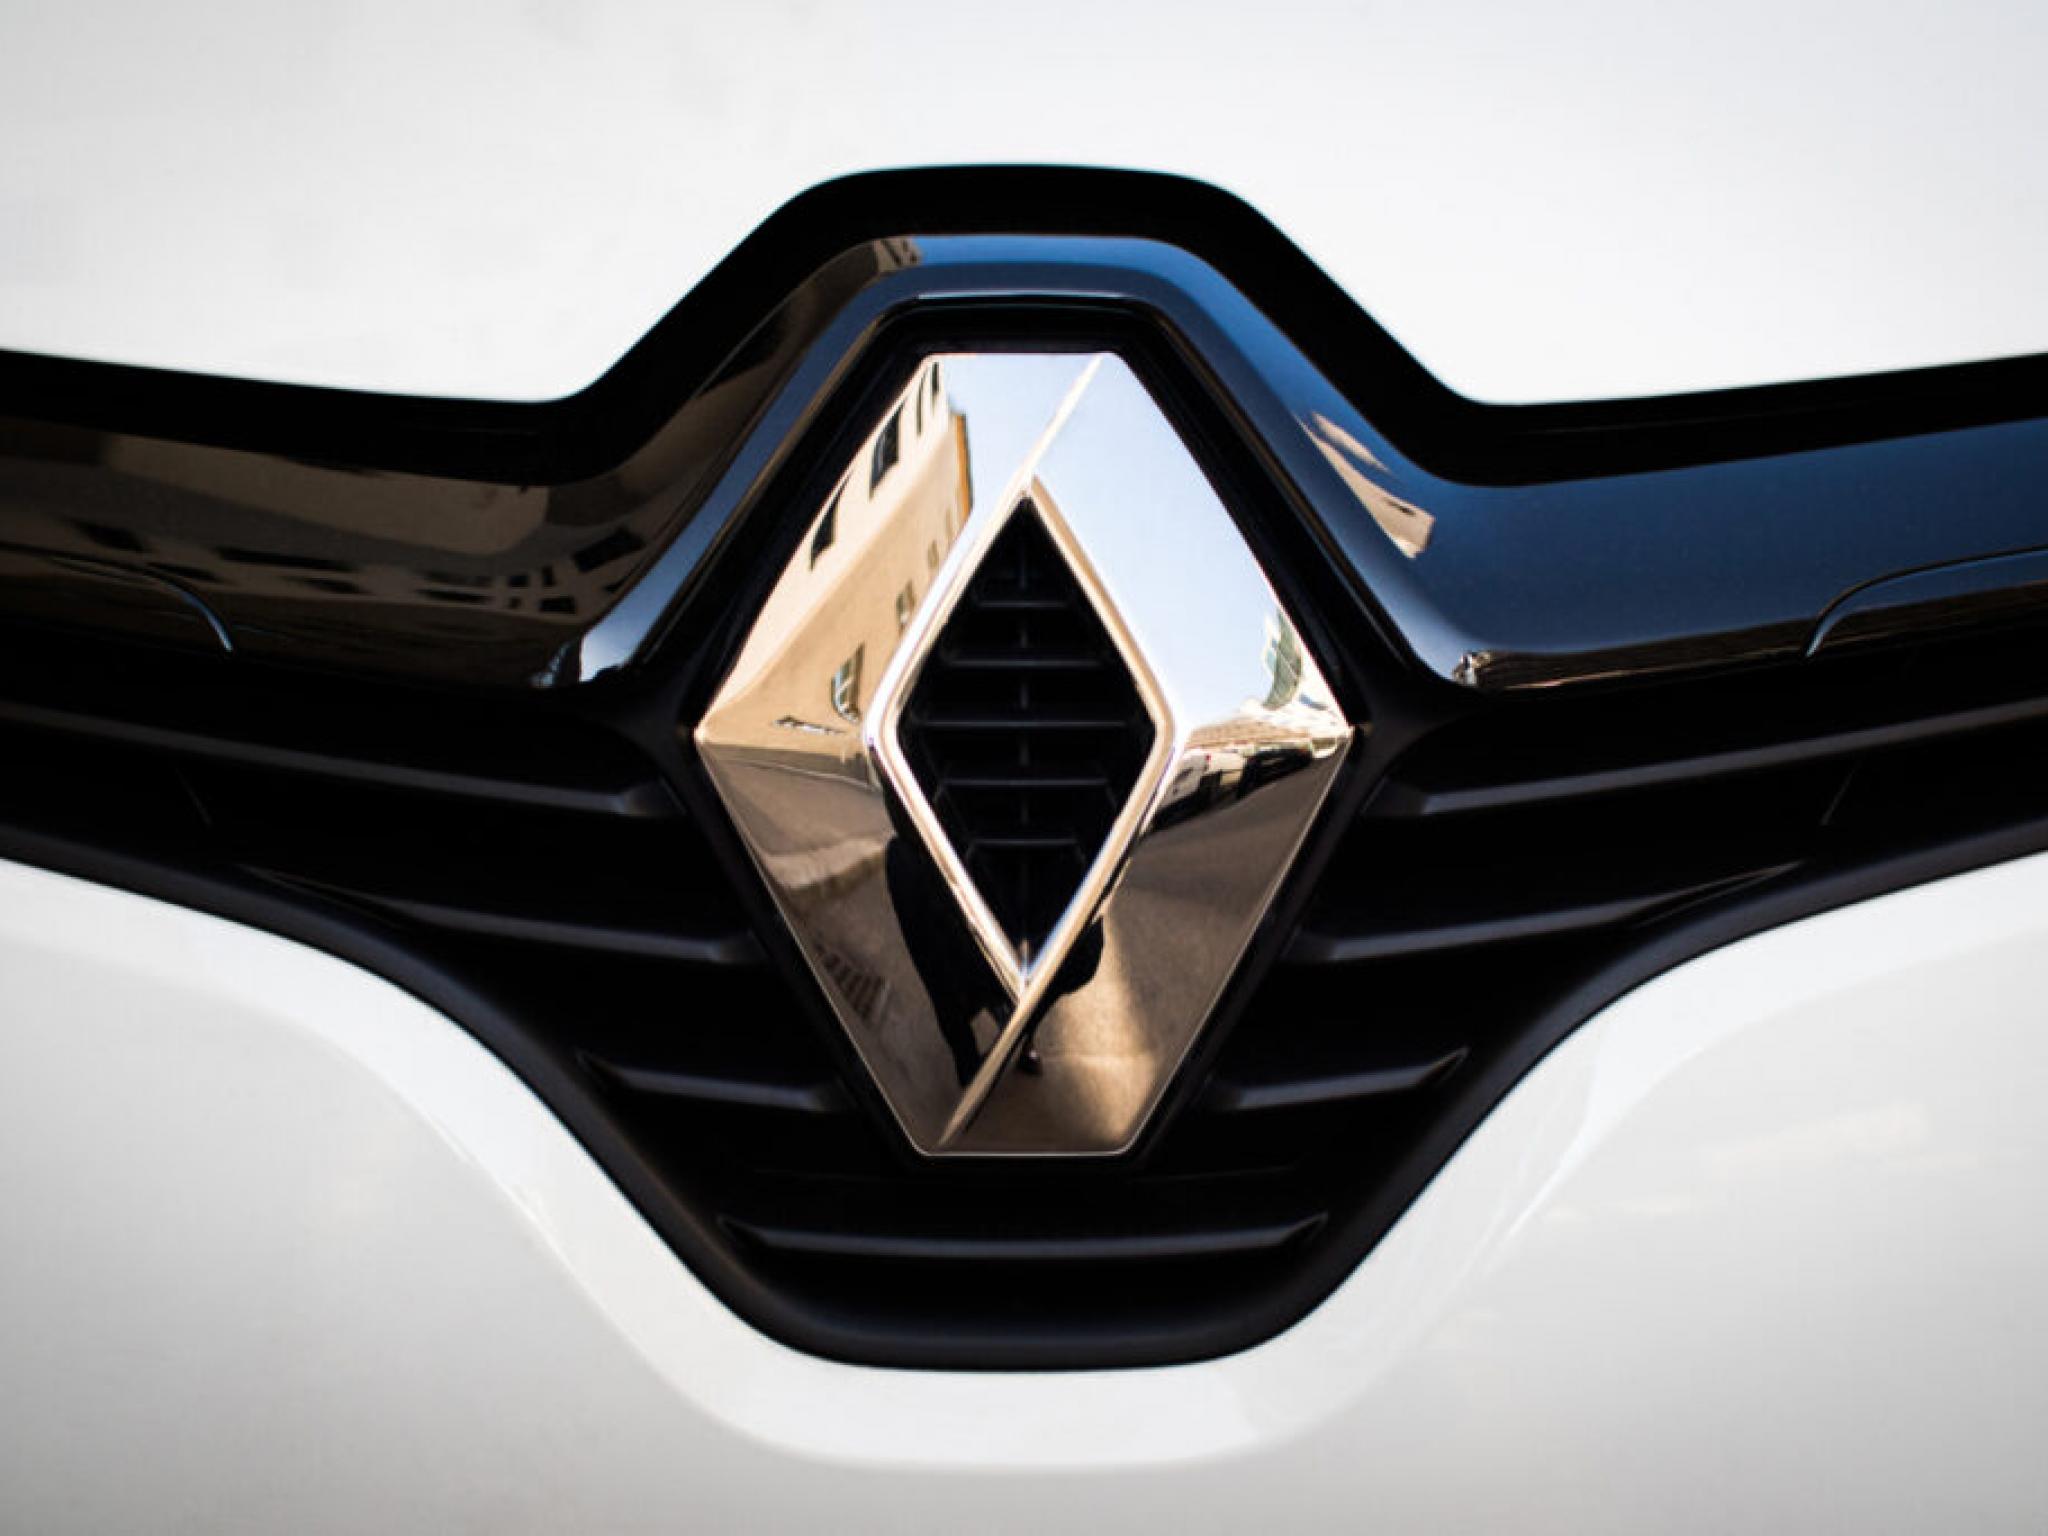  renault-group-hits-brakes-on-ev-software-arm-amperes-ipo-amidst-challenging-stock-market 